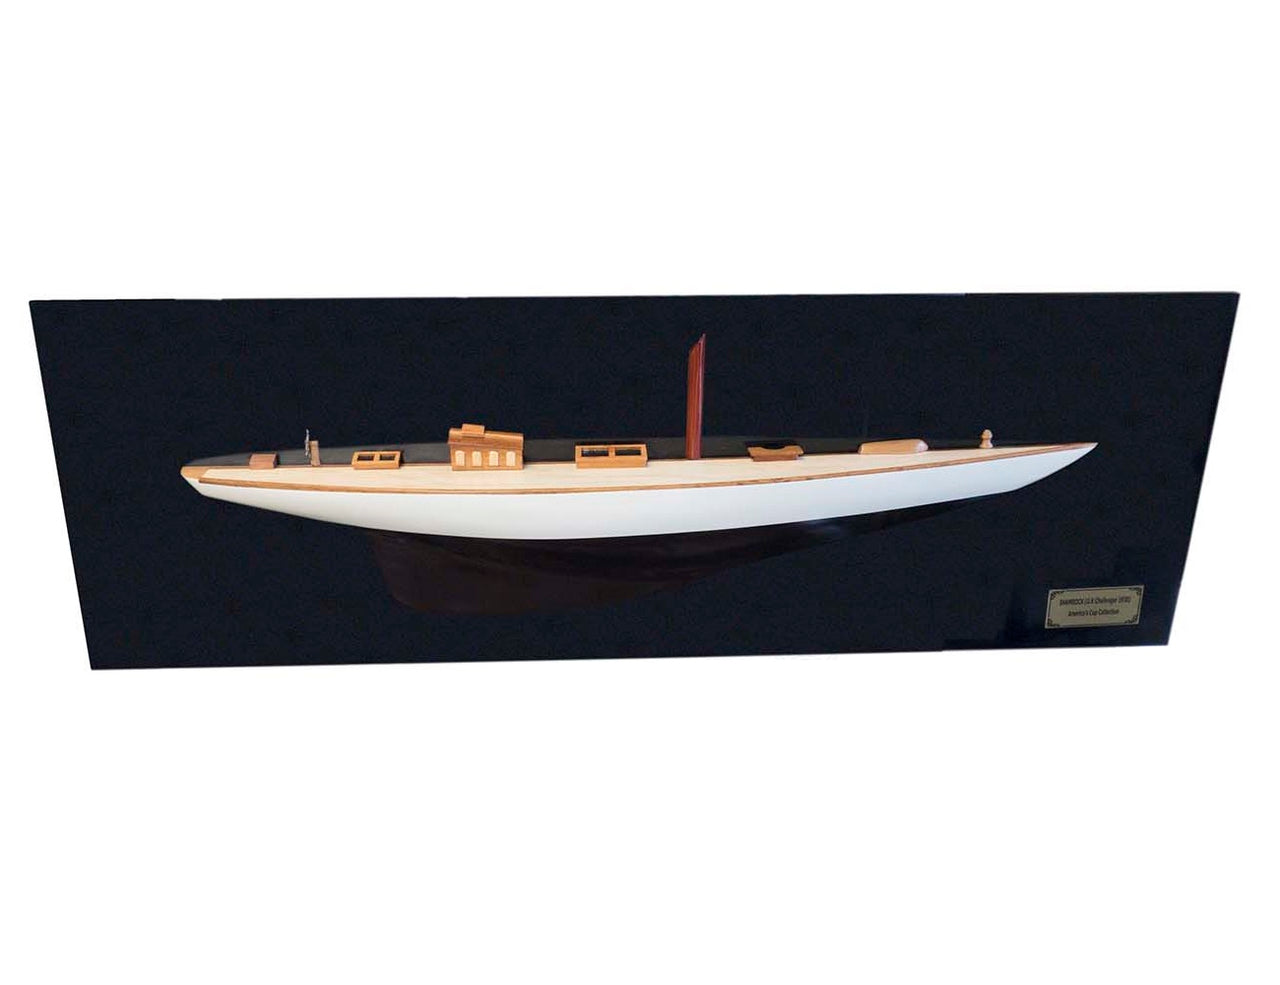 Shamrock Brown and White Painted Half-Hull Model Boat Yacht